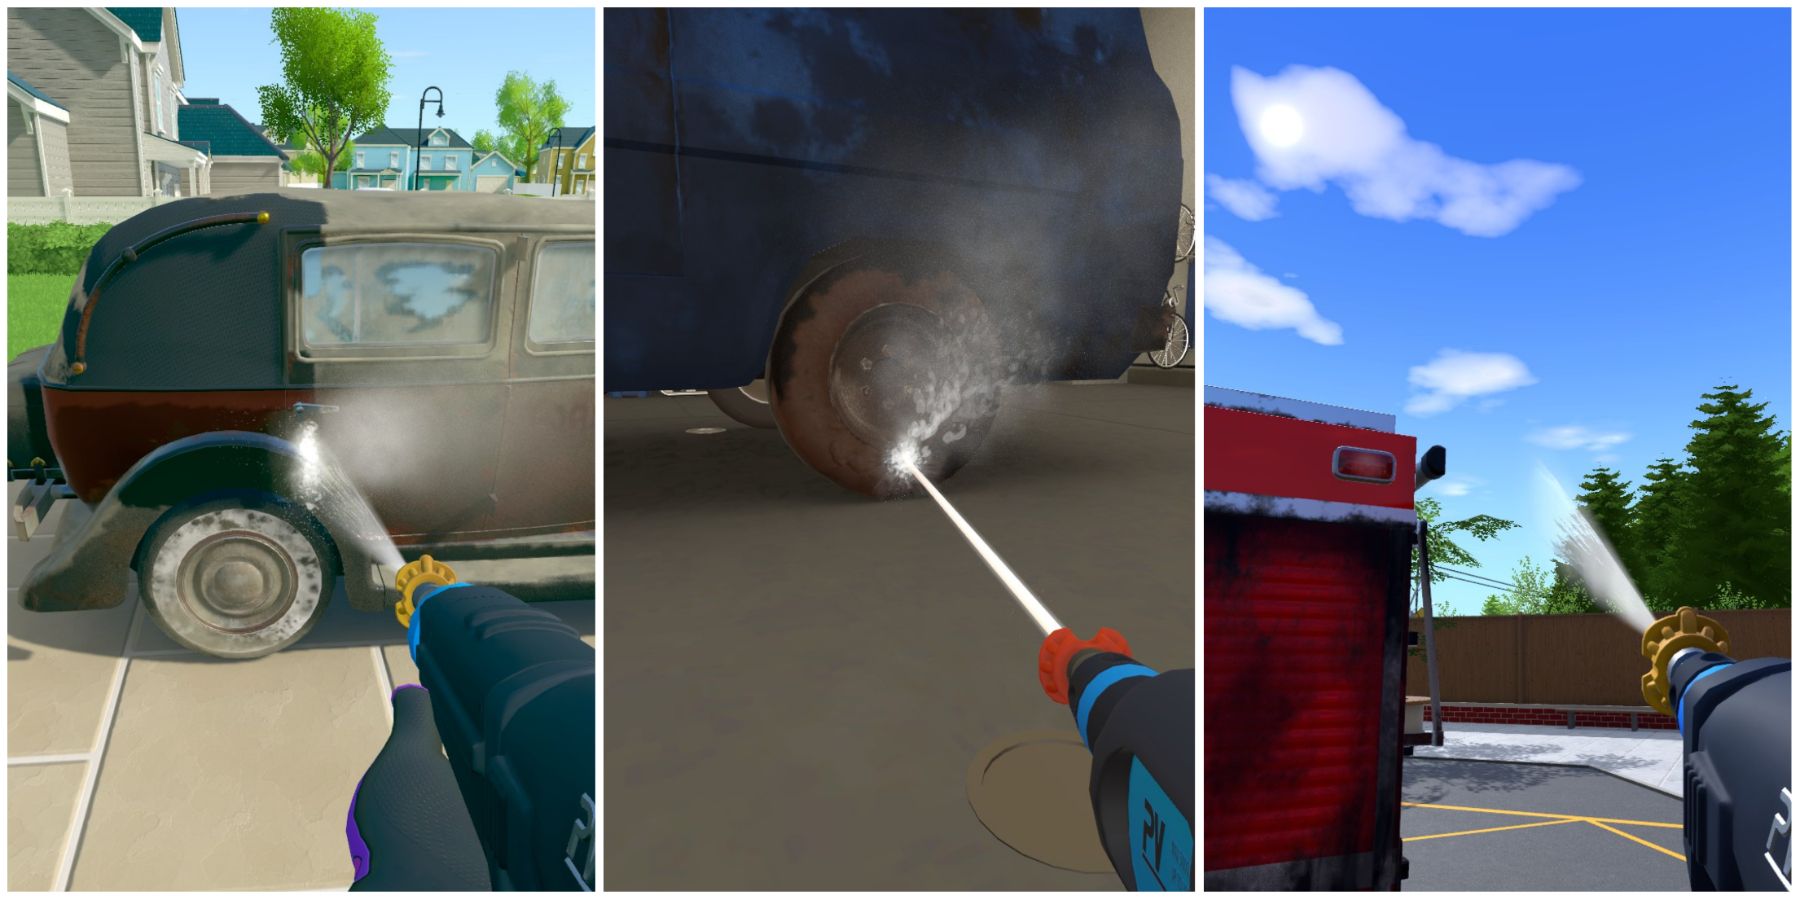 PowerWash Simulator: Tips For Completing Time Challenges